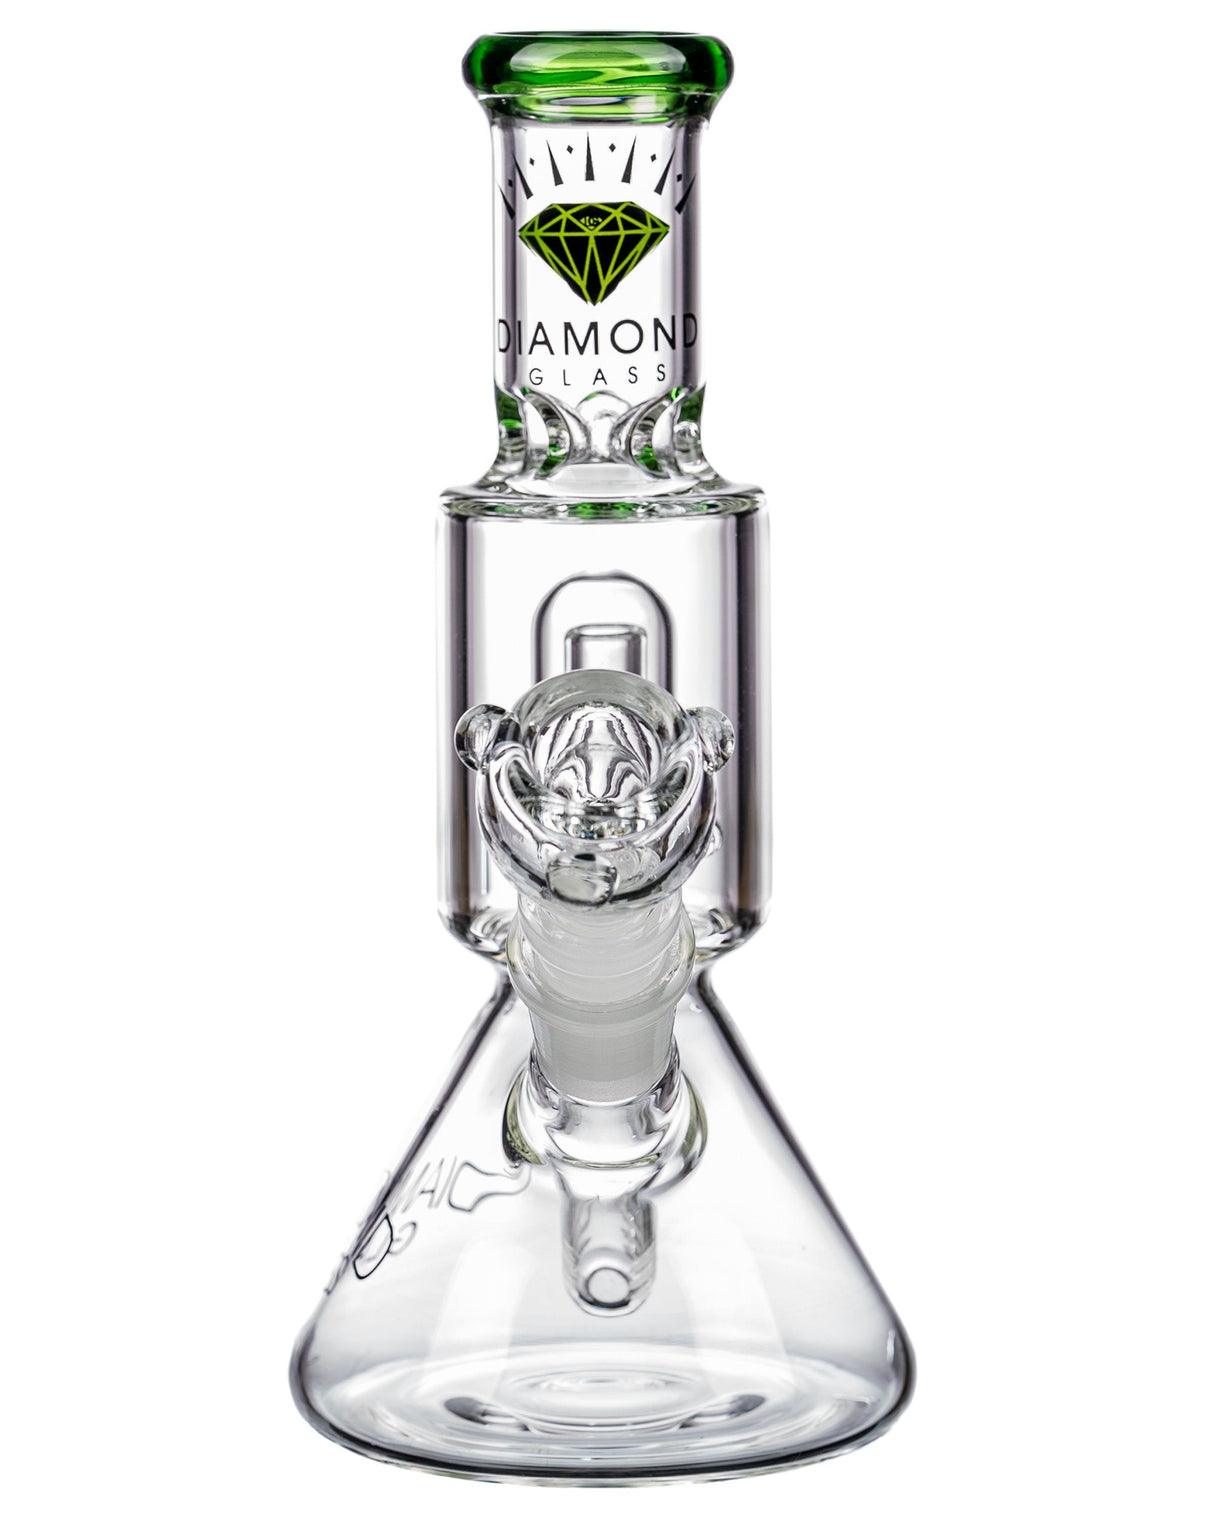 Diamond Glass Short Neck UFO Beaker Bong with Showerhead Percolator, Clear and Green Accents, Front View